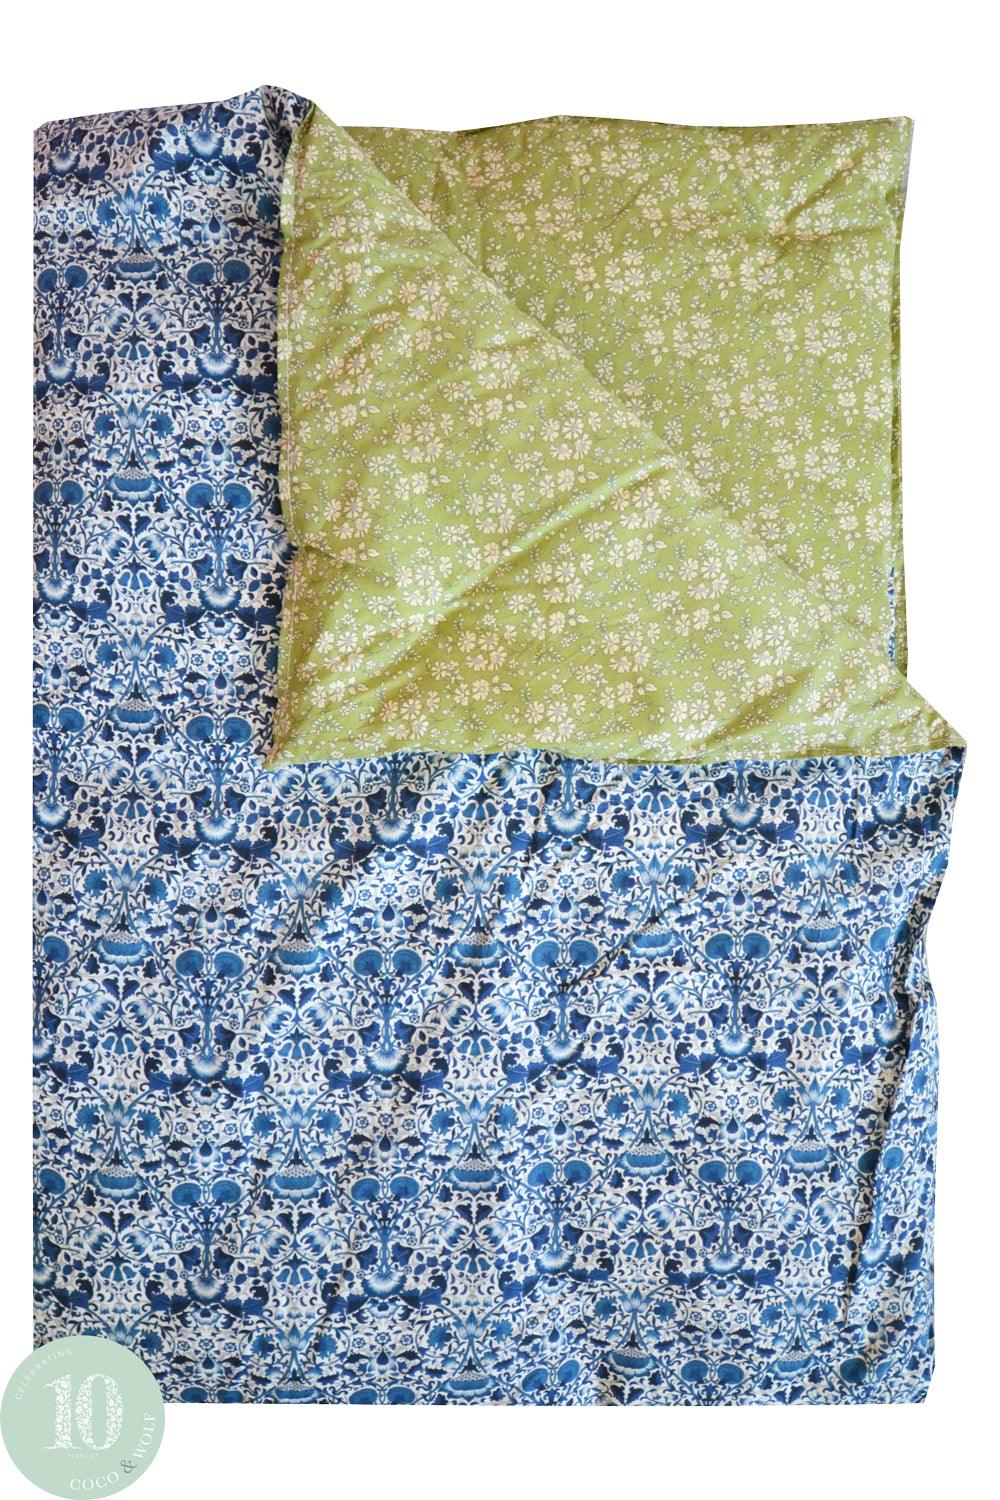 Reversible Heirloom Quilt made with Liberty Fabric LODDEN & CAPEL PISTACHIO - Coco & Wolf